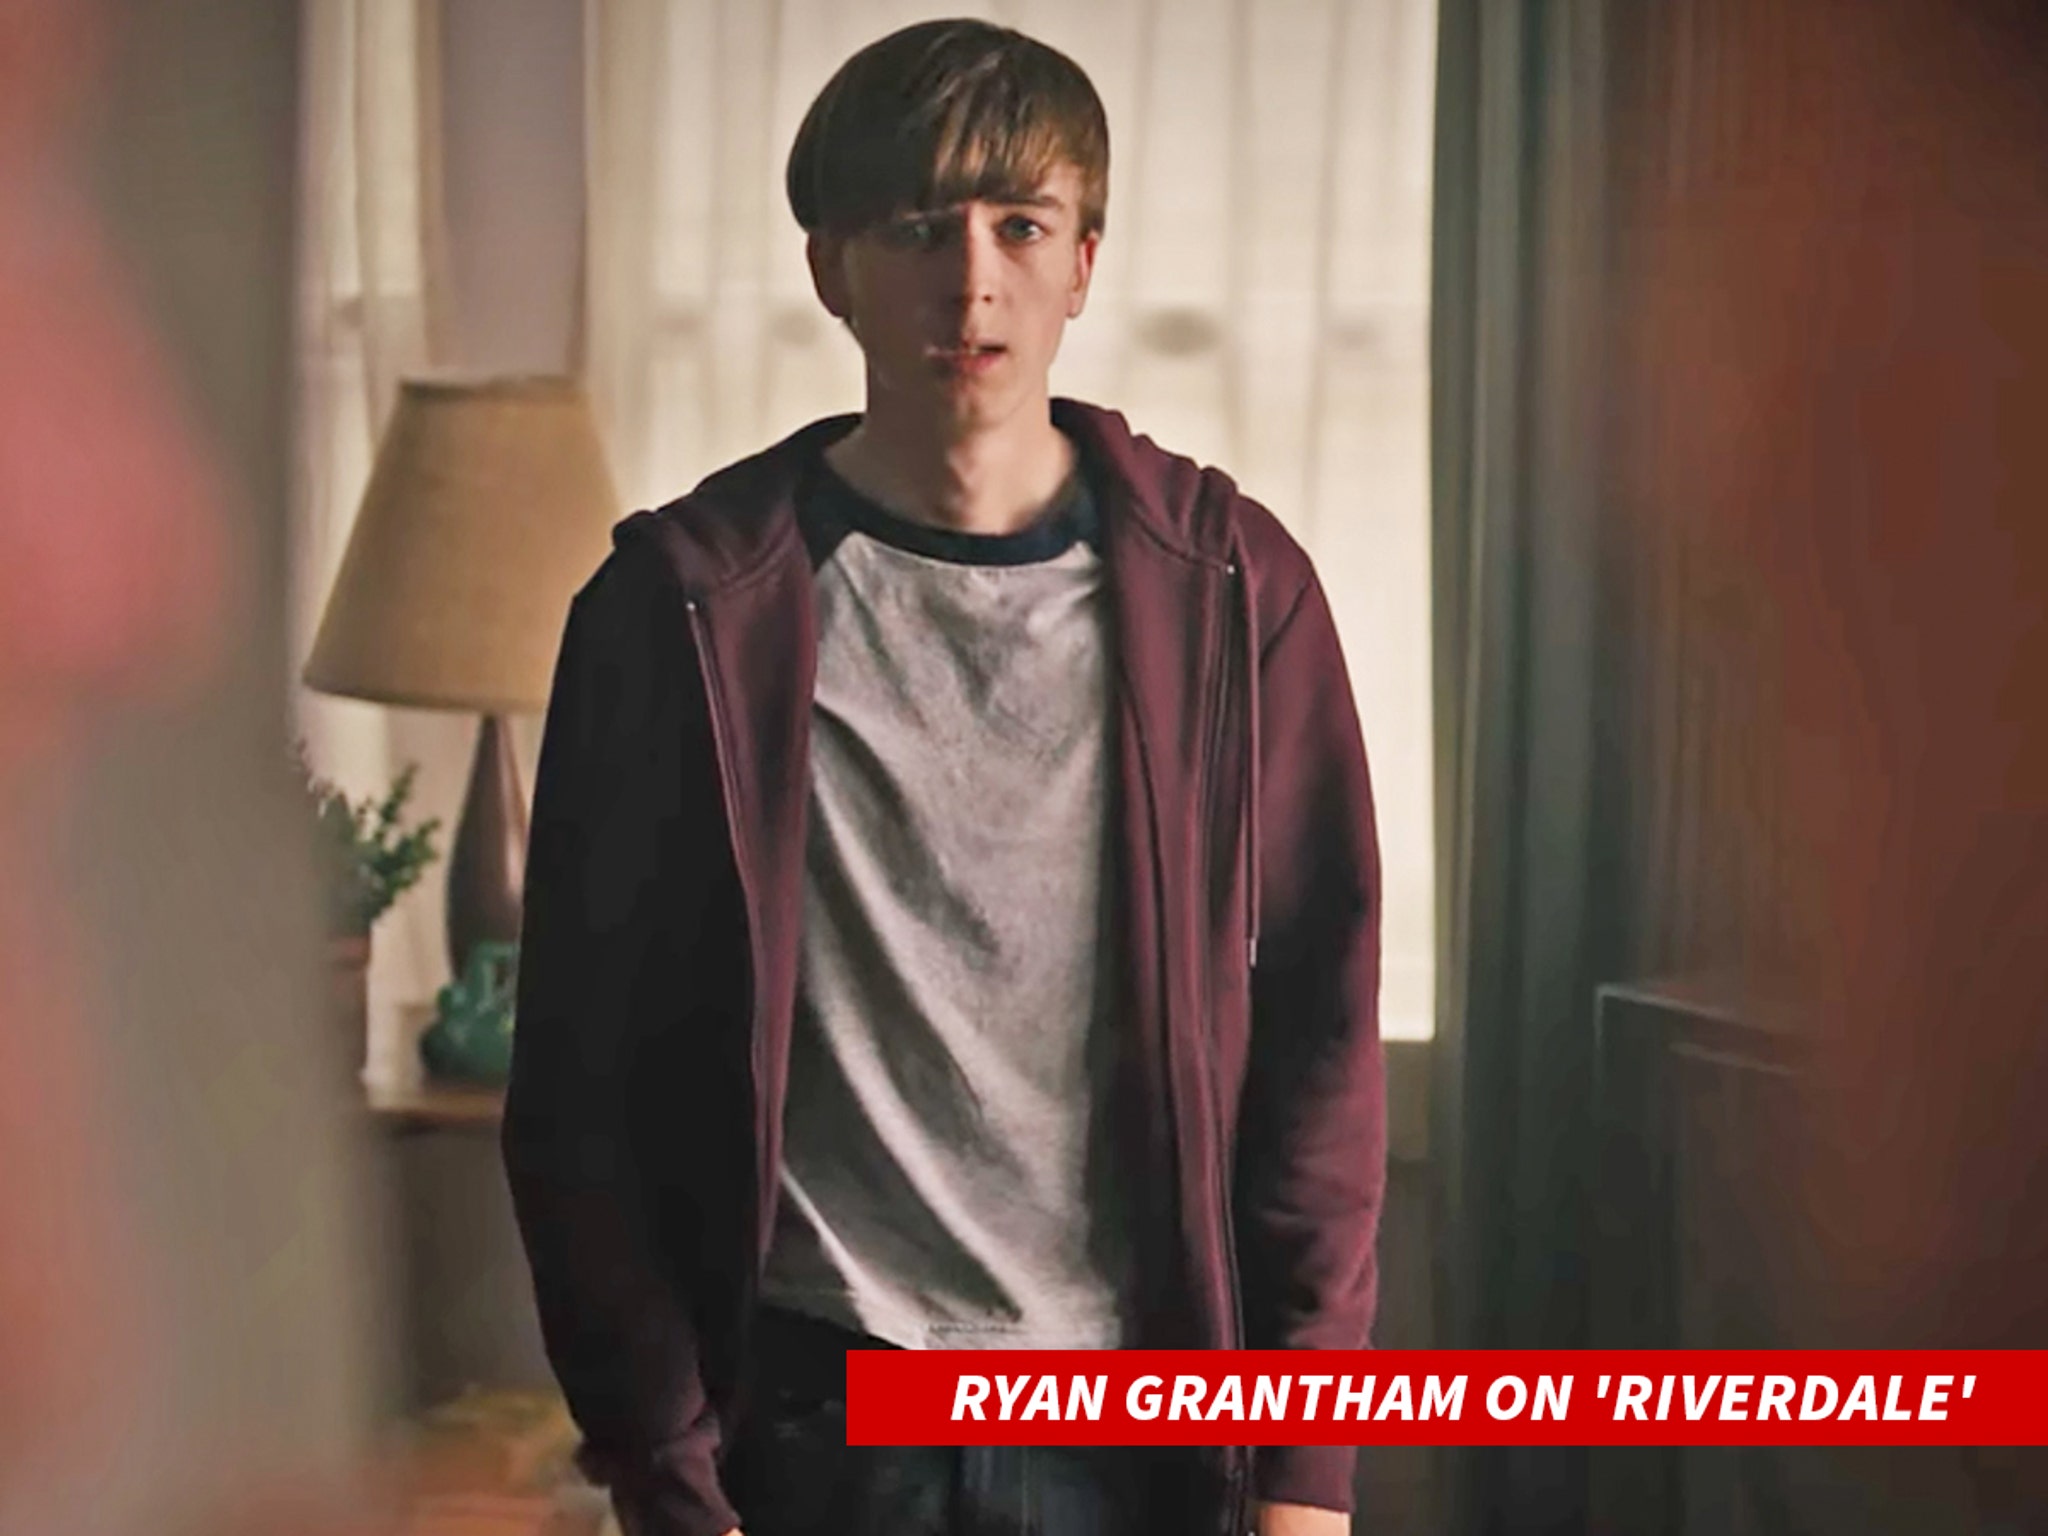 ‘Riverdale’ Actor Ryan Grantham Gets Life In Prison For Murdering Mom